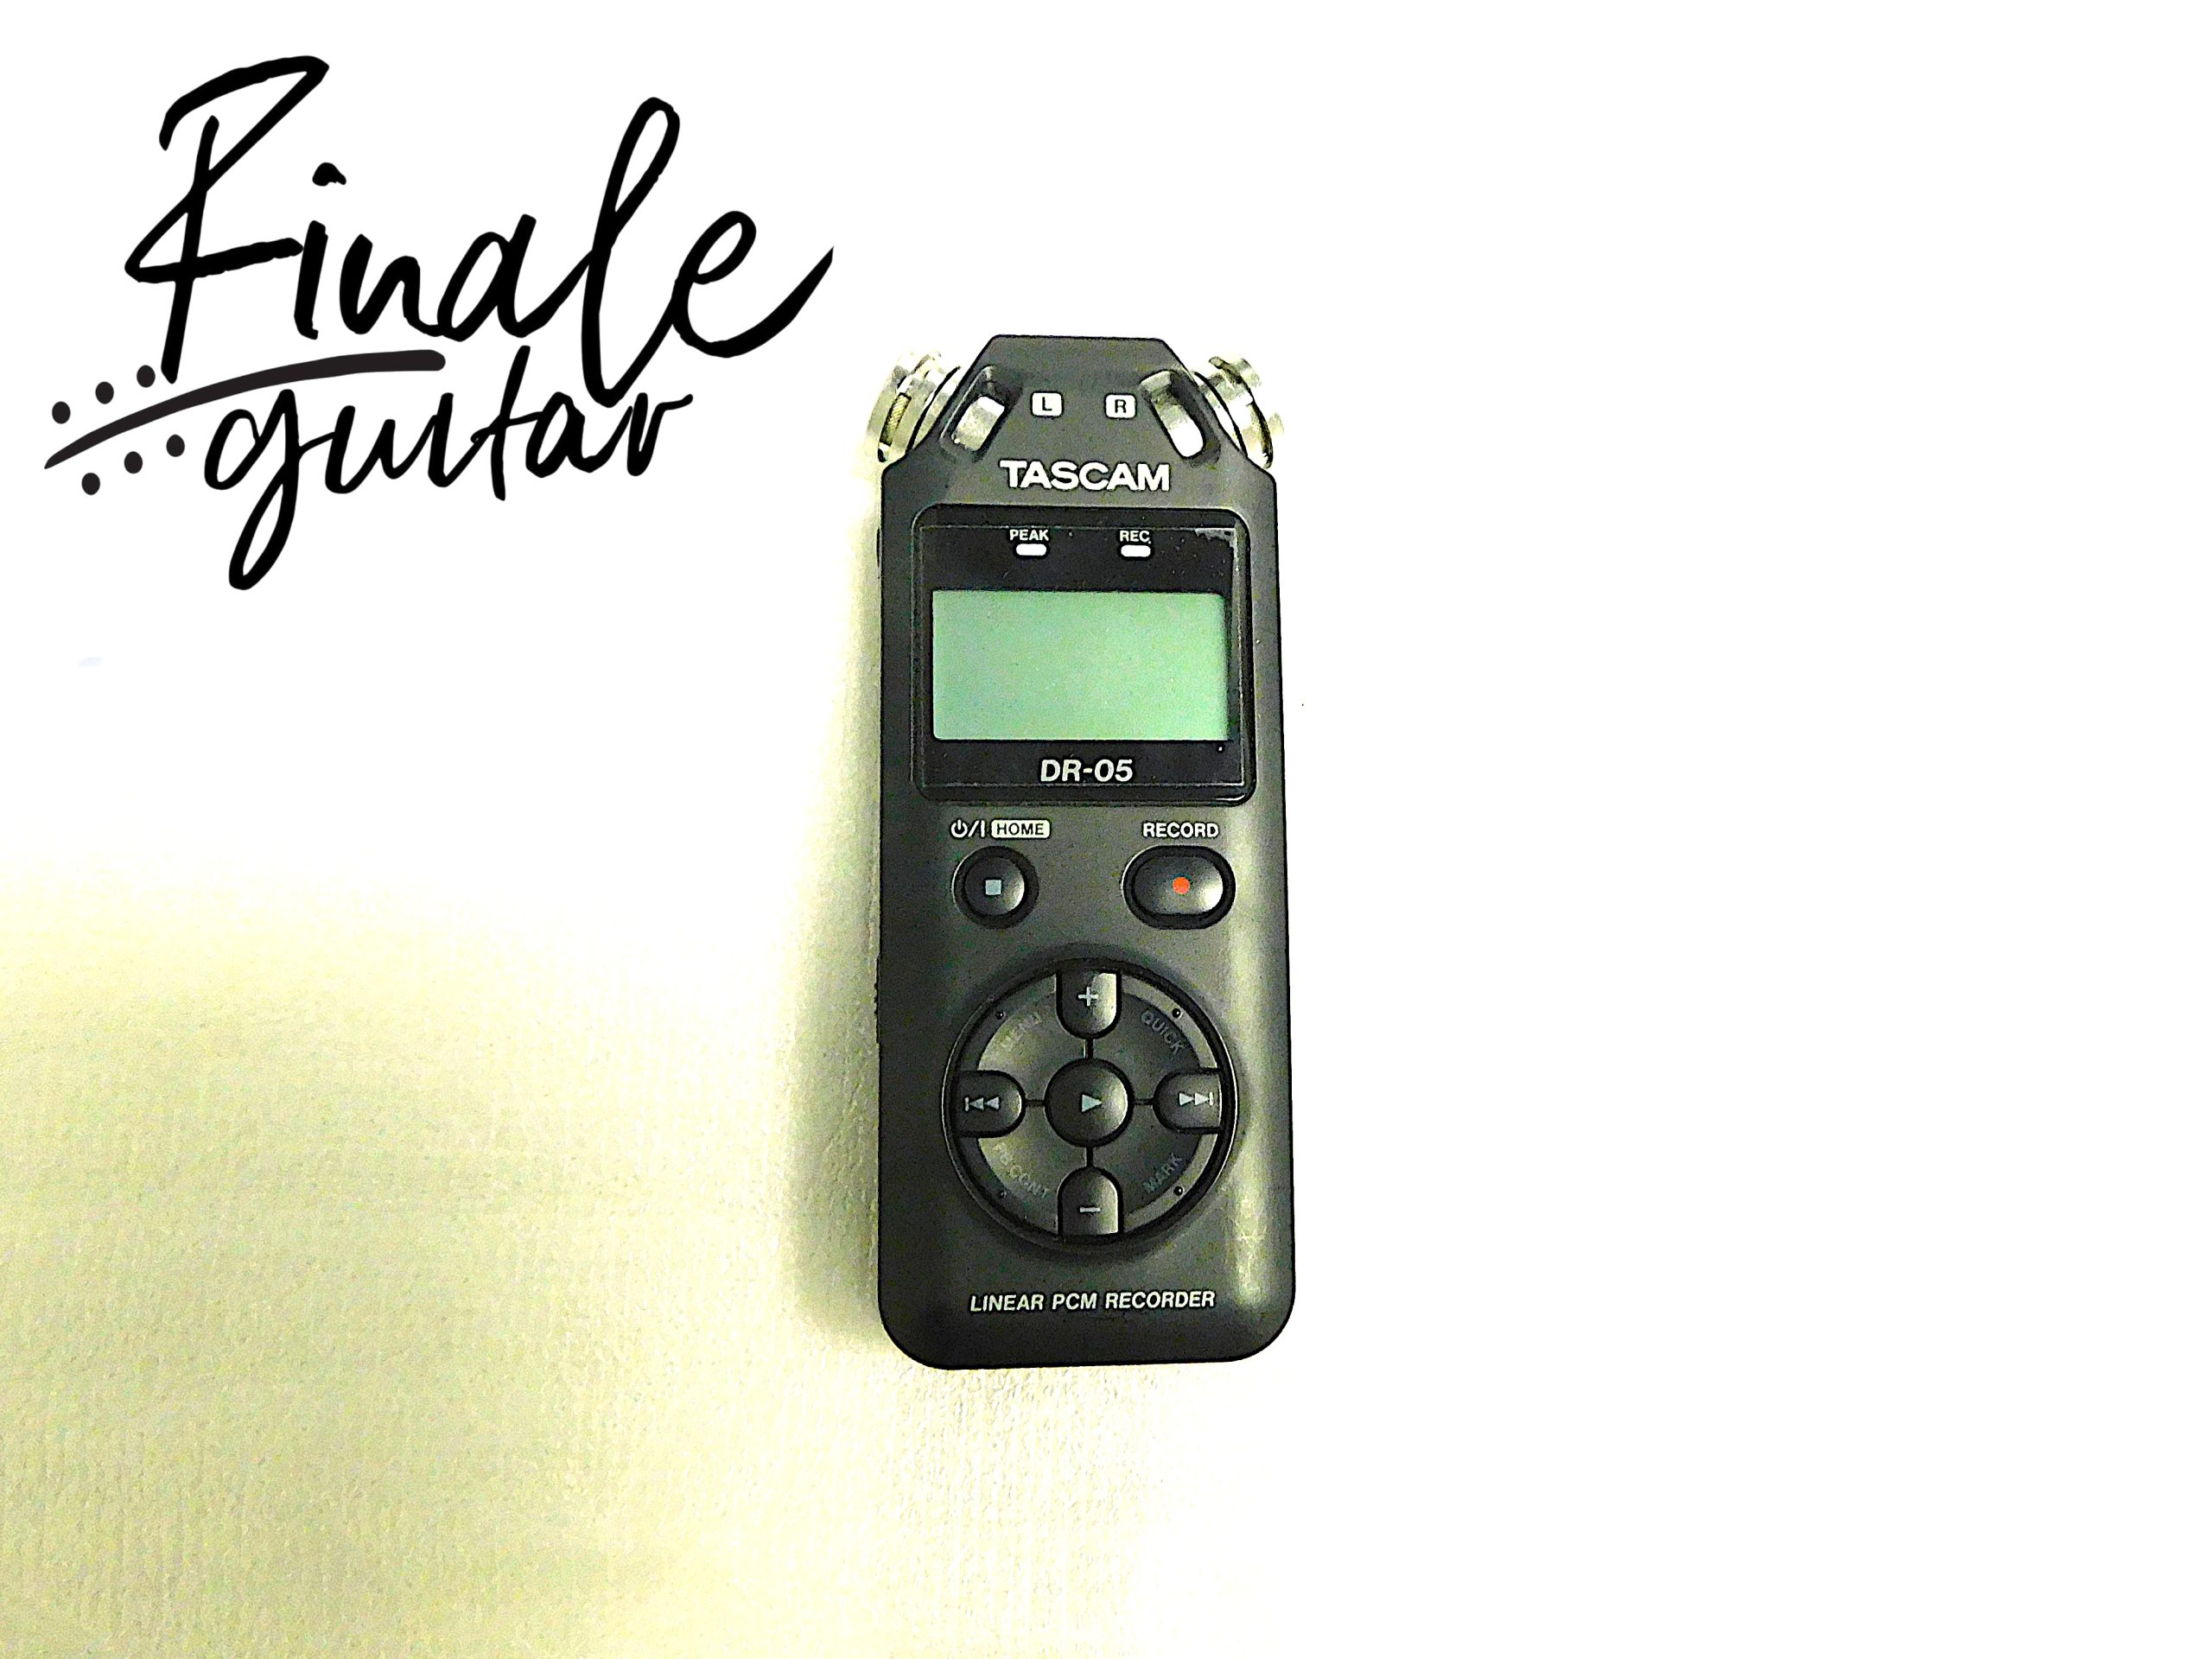 Zoom DR-04 Micro Recorder for sale in our Sheffield guitar shop, Finale Guitar